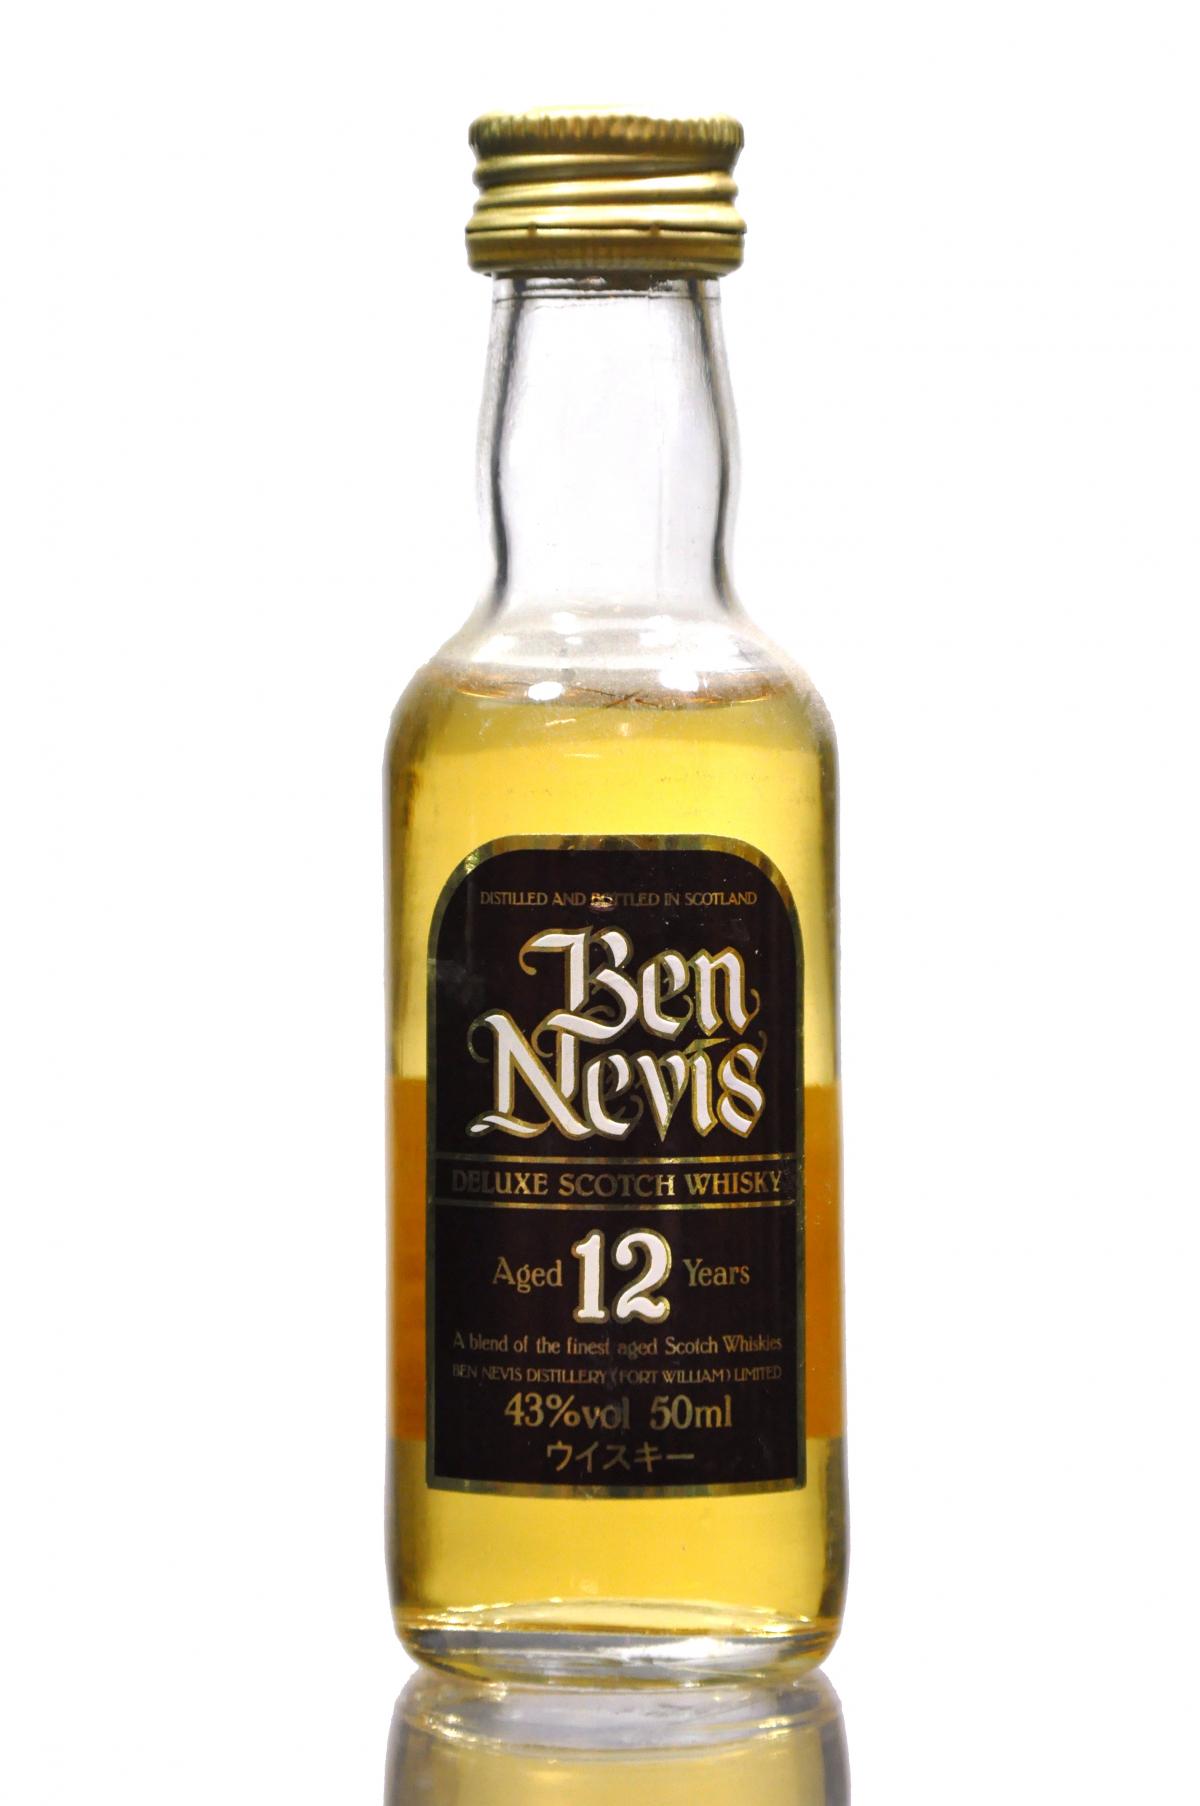 Ben Nevis 12 Year Old De Luxe - Blended Whisky - Japan Import - 1980s - Miniature